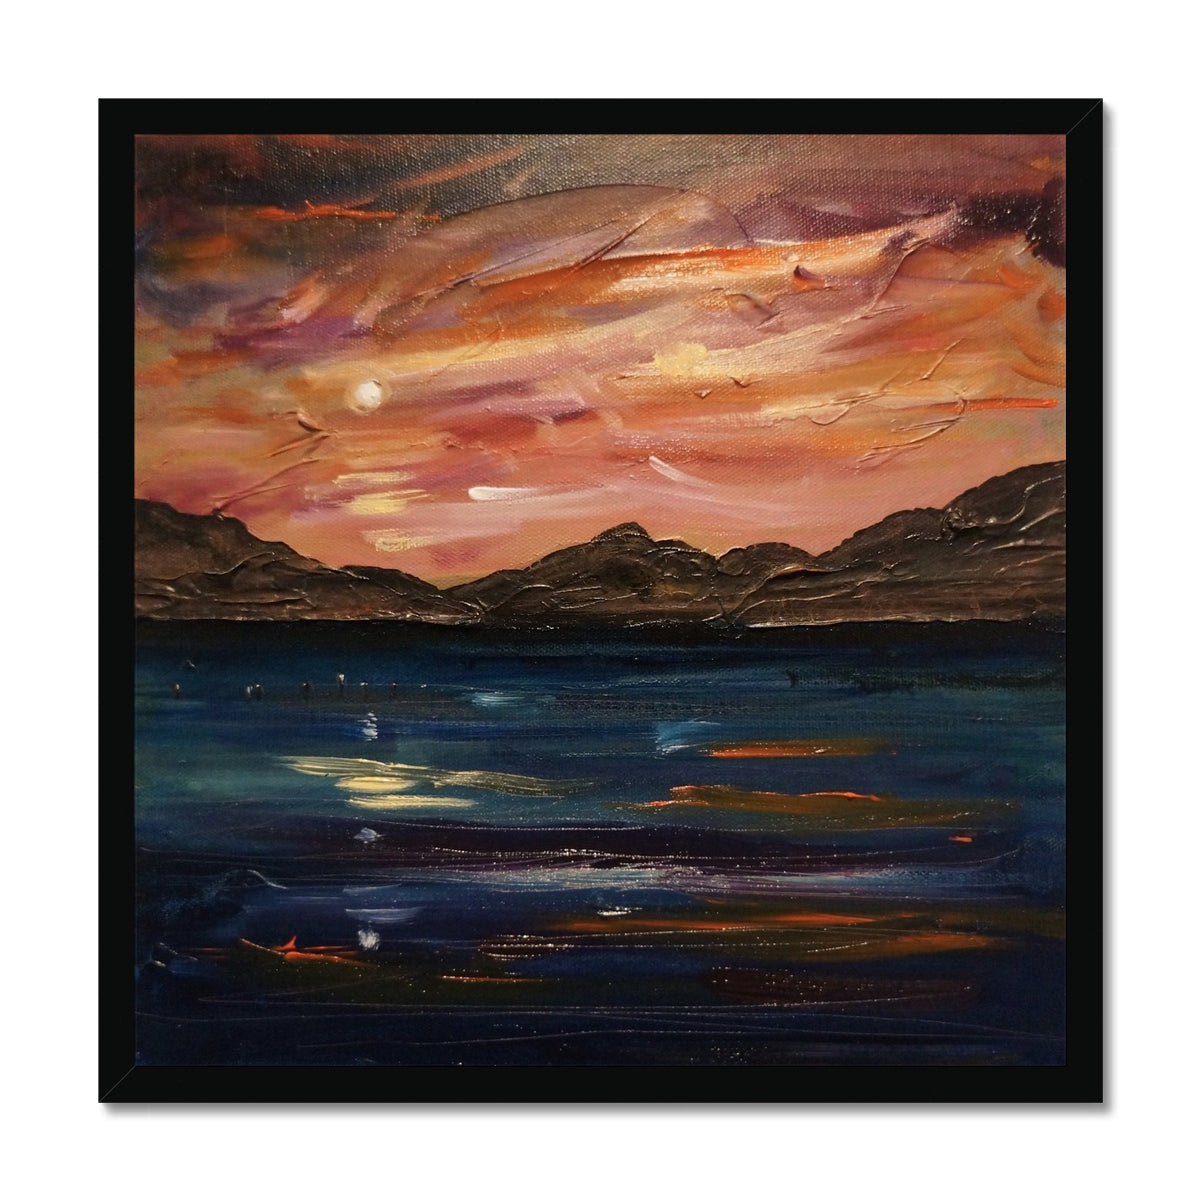 Loch Ness Moonset Painting | Framed Prints From Scotland-Framed Prints-Scottish Lochs & Mountains Art Gallery-20"x20"-Black Frame-Paintings, Prints, Homeware, Art Gifts From Scotland By Scottish Artist Kevin Hunter